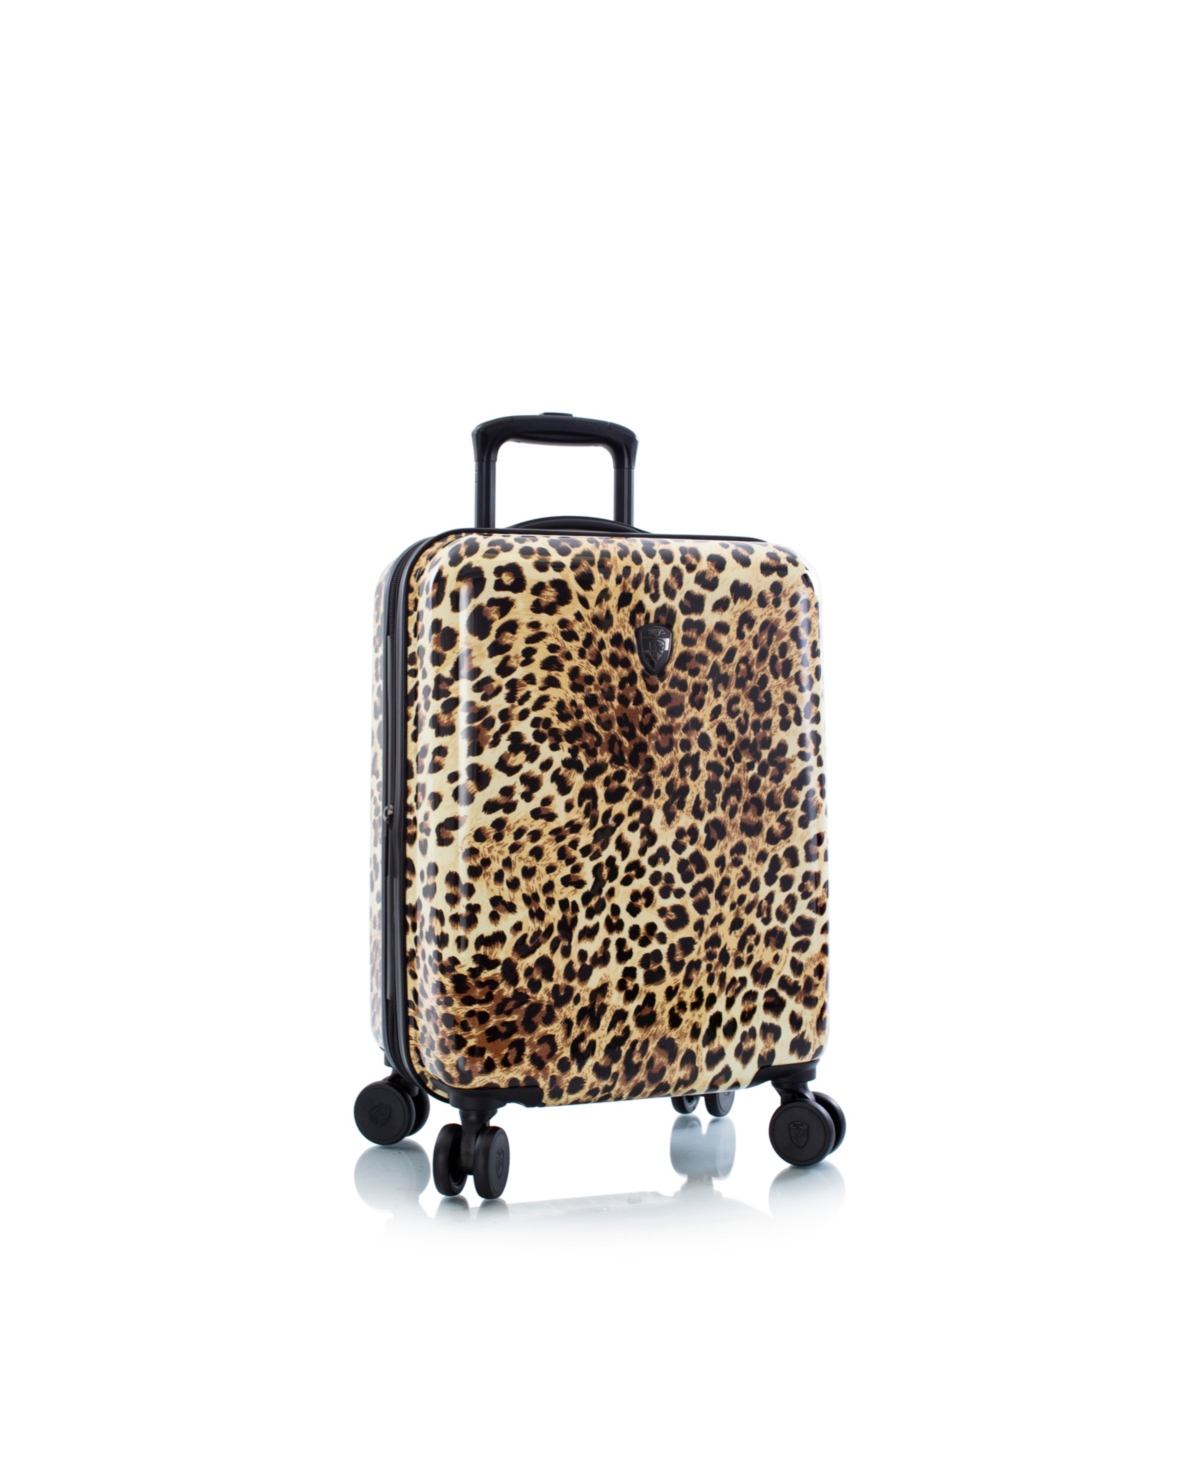 Fashion 21" Hardside Carry-On Spinner Luggage - Brown Leopard